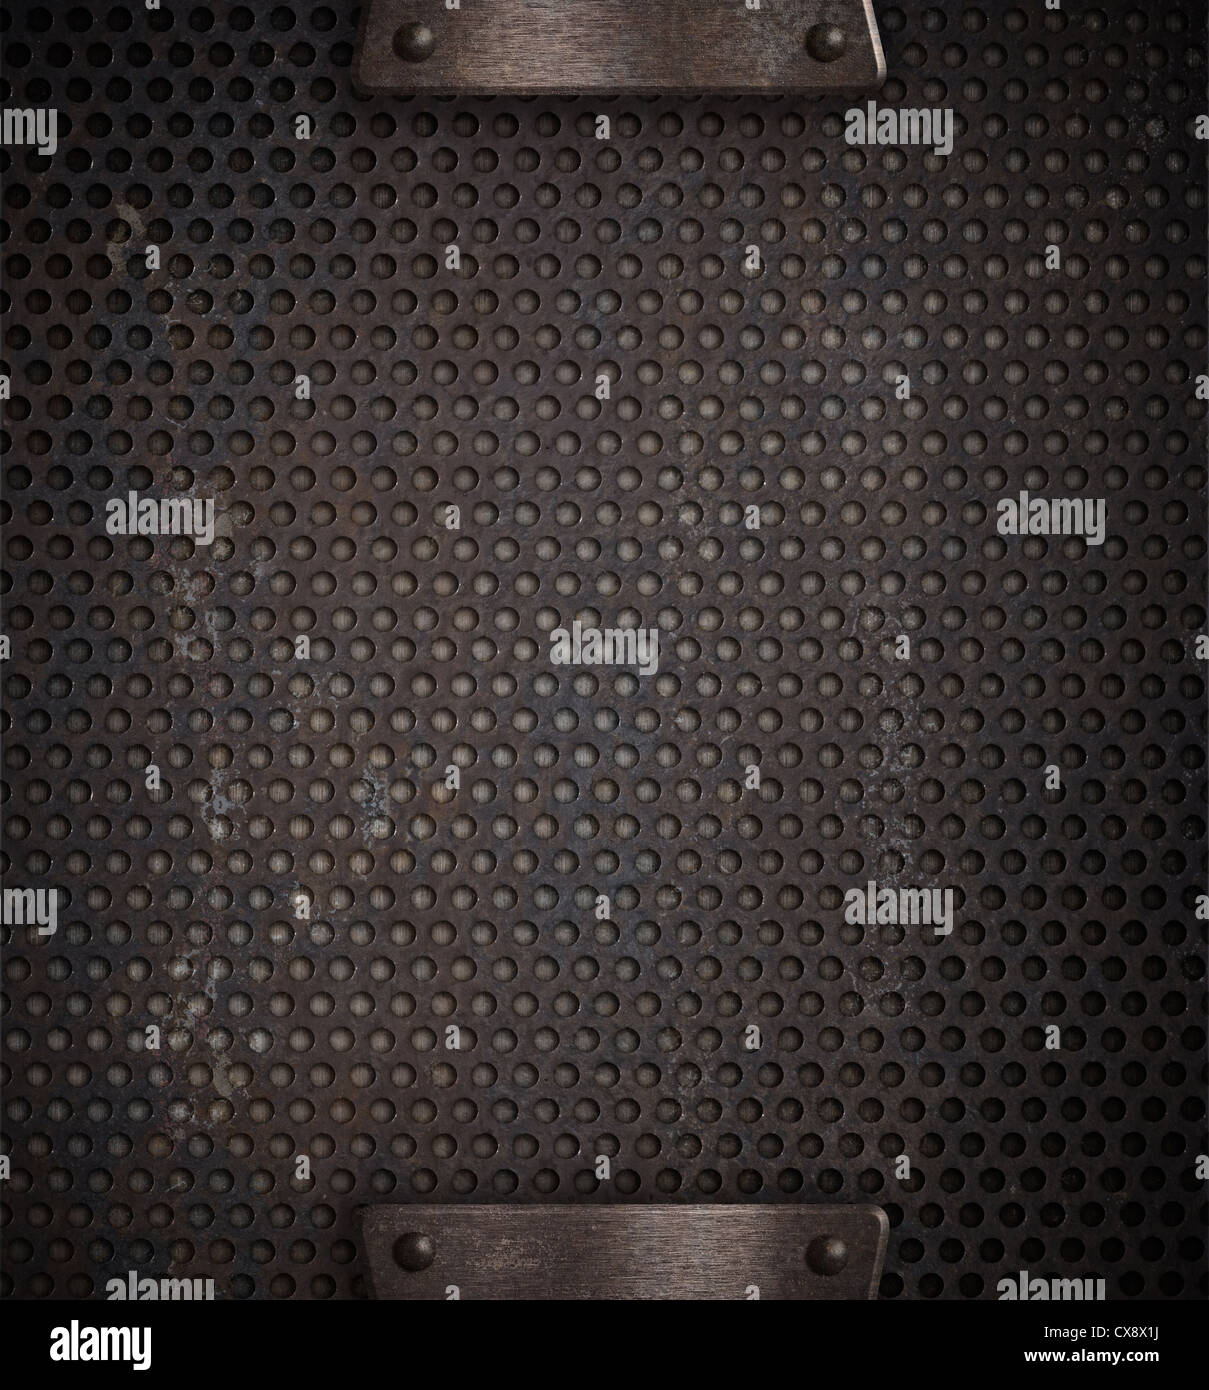 metal holed or perforated grid background Stock Photo